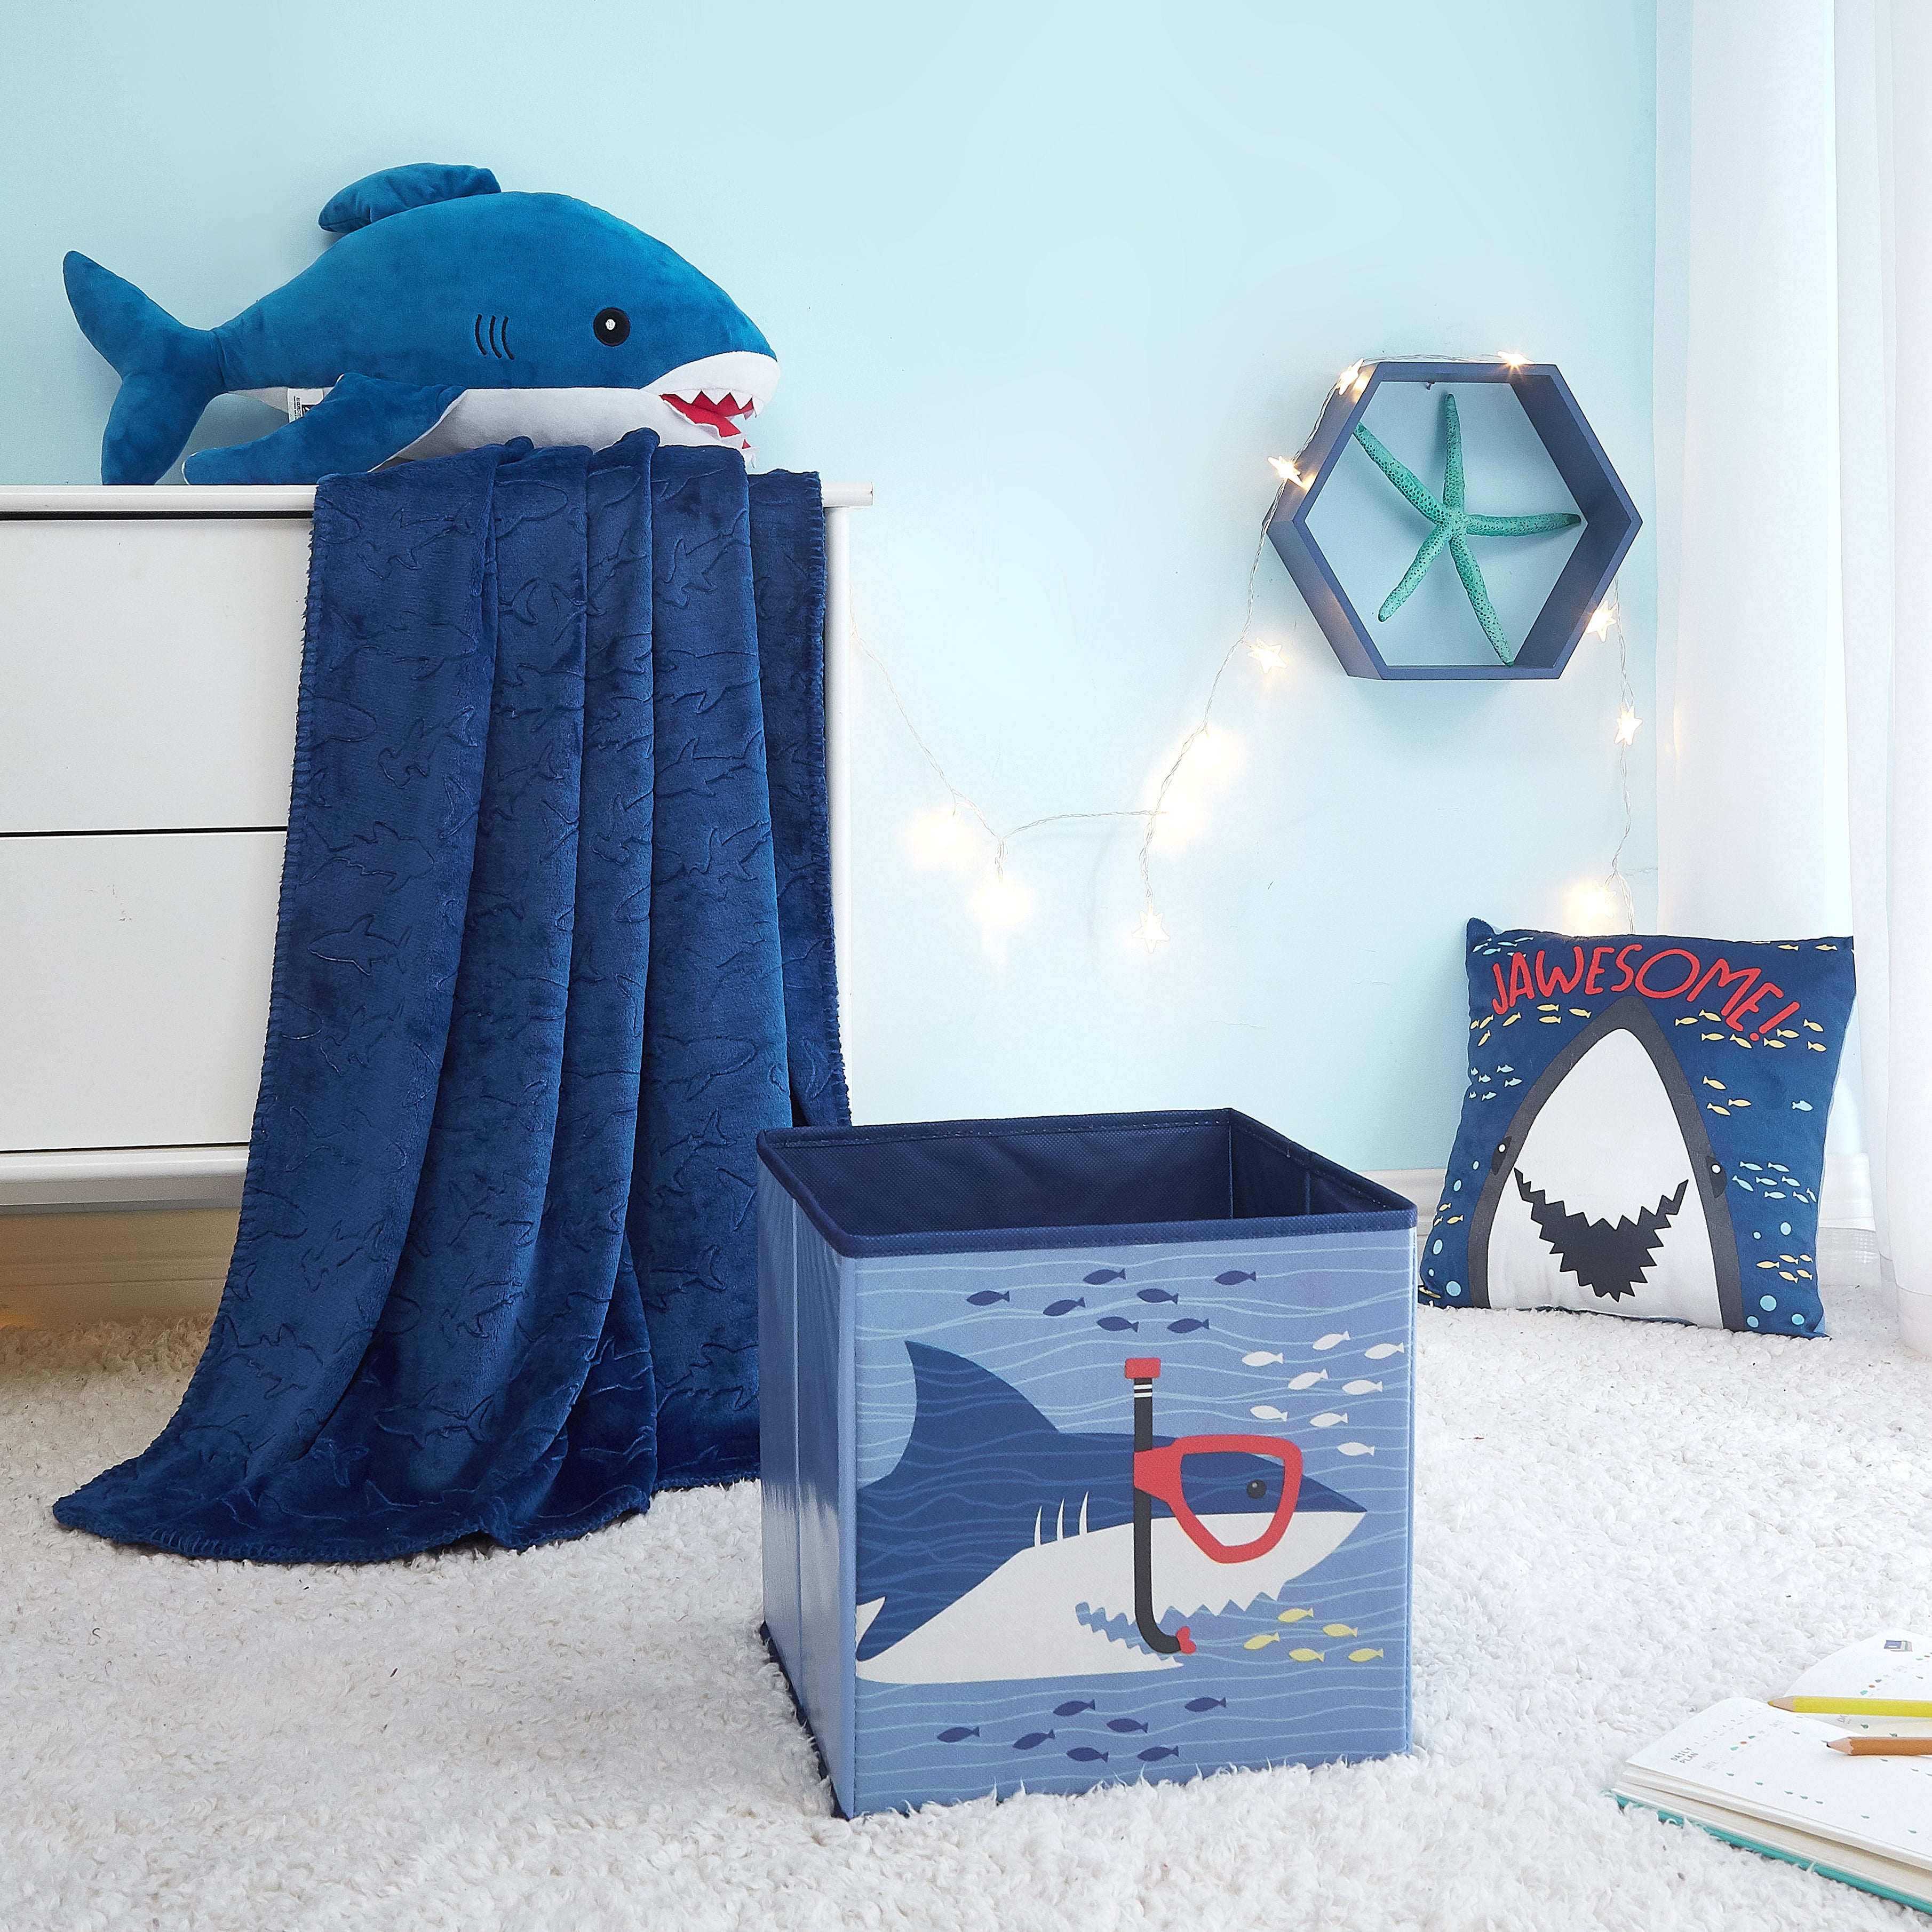 Hooded Shark Throw Blanket 40" x 50" Grey Blue Your Zone 